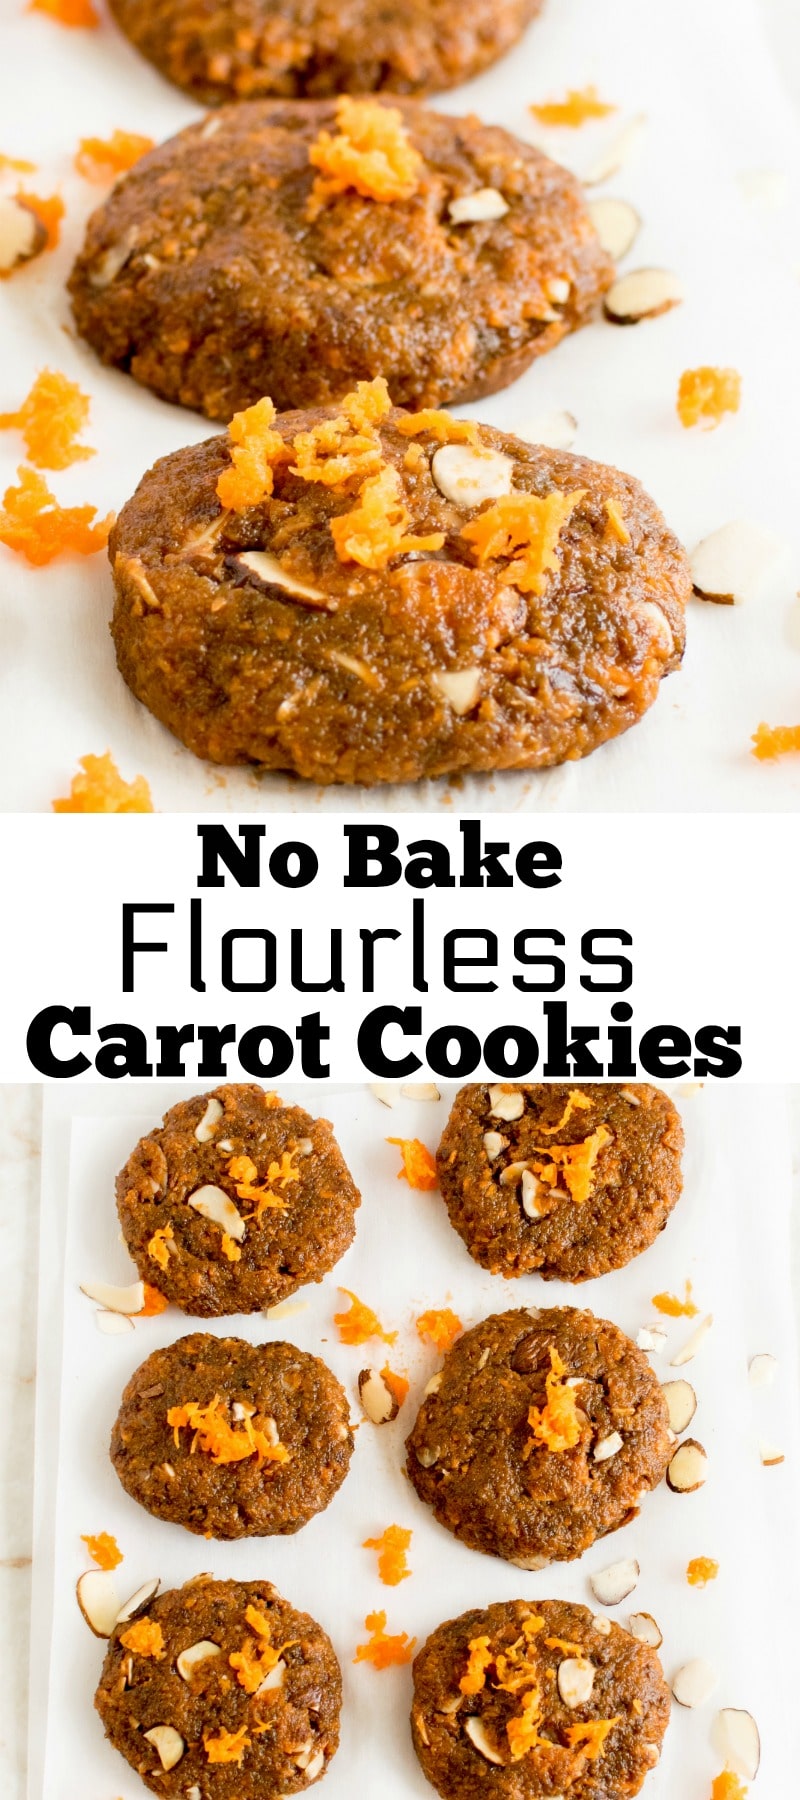 No Bake Flourless Carrot Cookies [ vegan + paleo ] only 4 ingredients dessert/snack thats quick and easy grab and go sweet treat | kiipfit.com